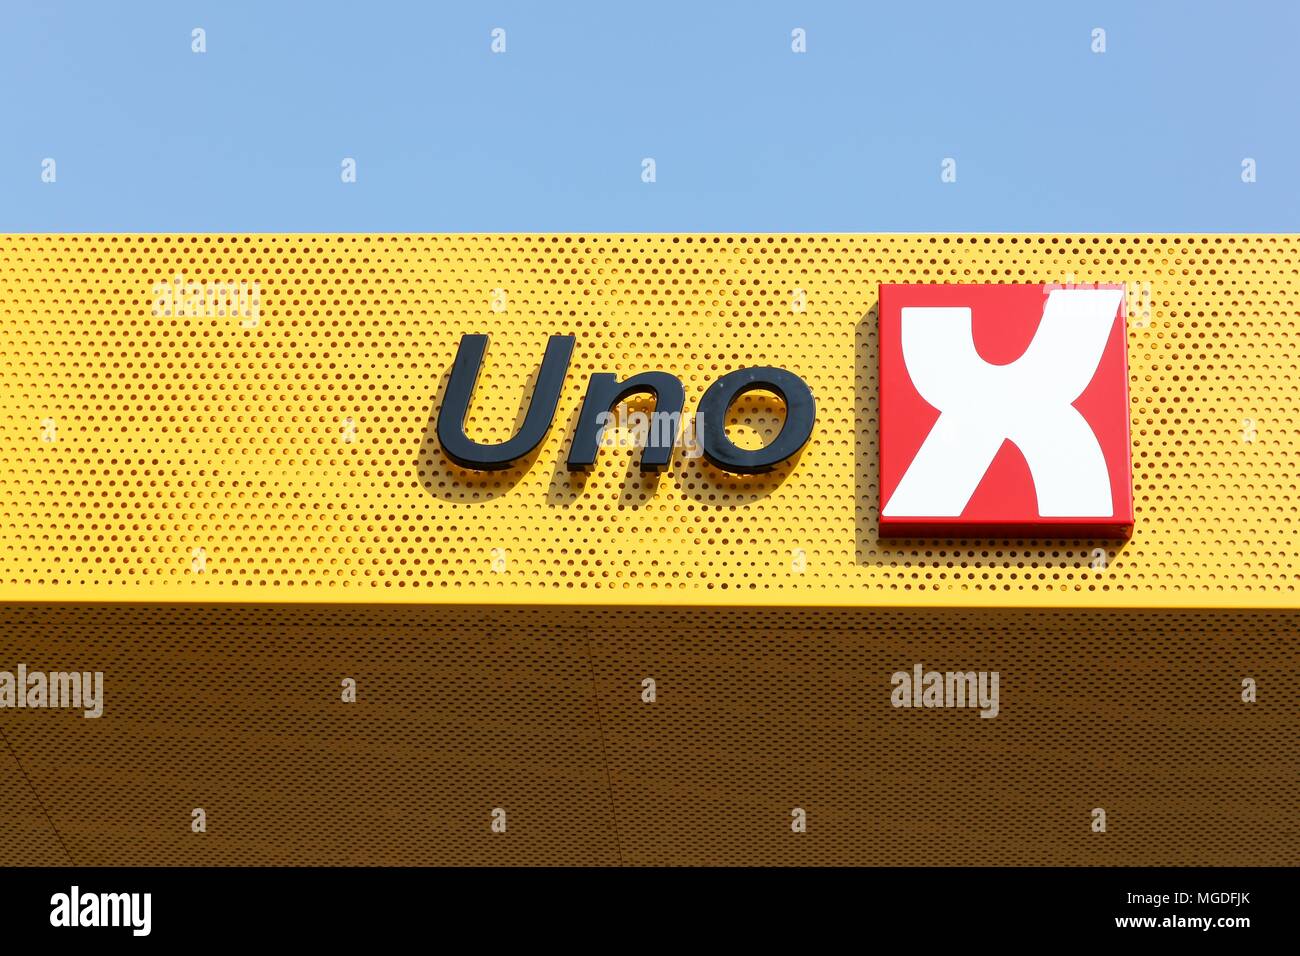 Brabrand, Denmark - April 20, 2018: Uno-X logo on a fuel station. Uno-X is a chain of unmanned fuel stations throughout Norway and Denmark Stock Photo